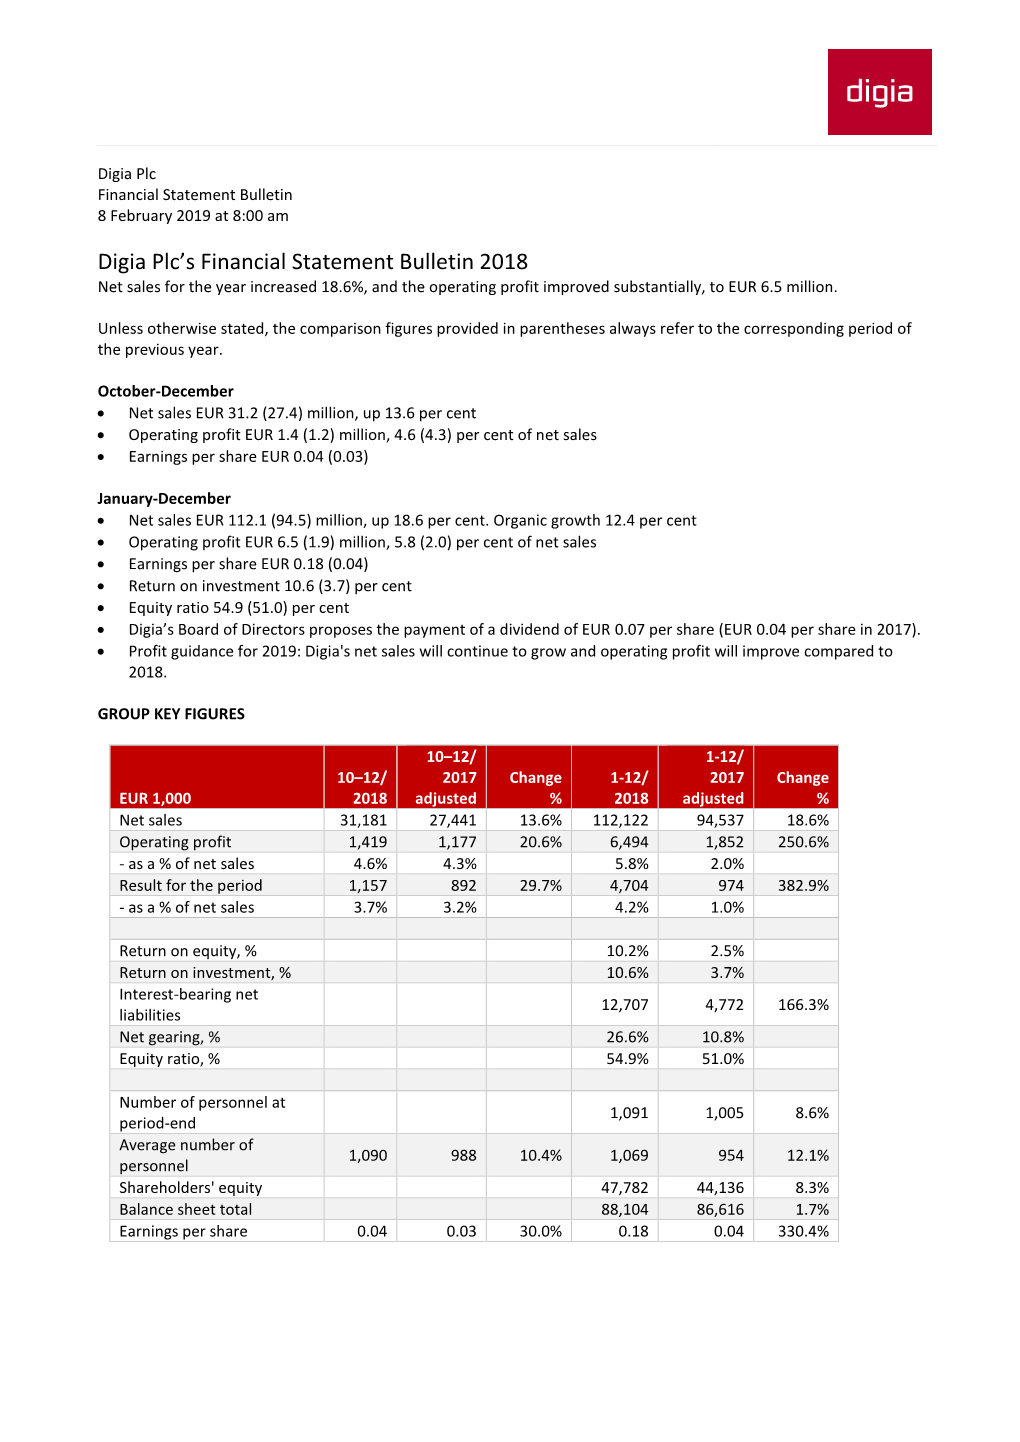 Financial Statement Bulletin 2018 Net Sales for the Year Increased 18.6%, and the Operating Profit Improved Substantially, to EUR 6.5 Million